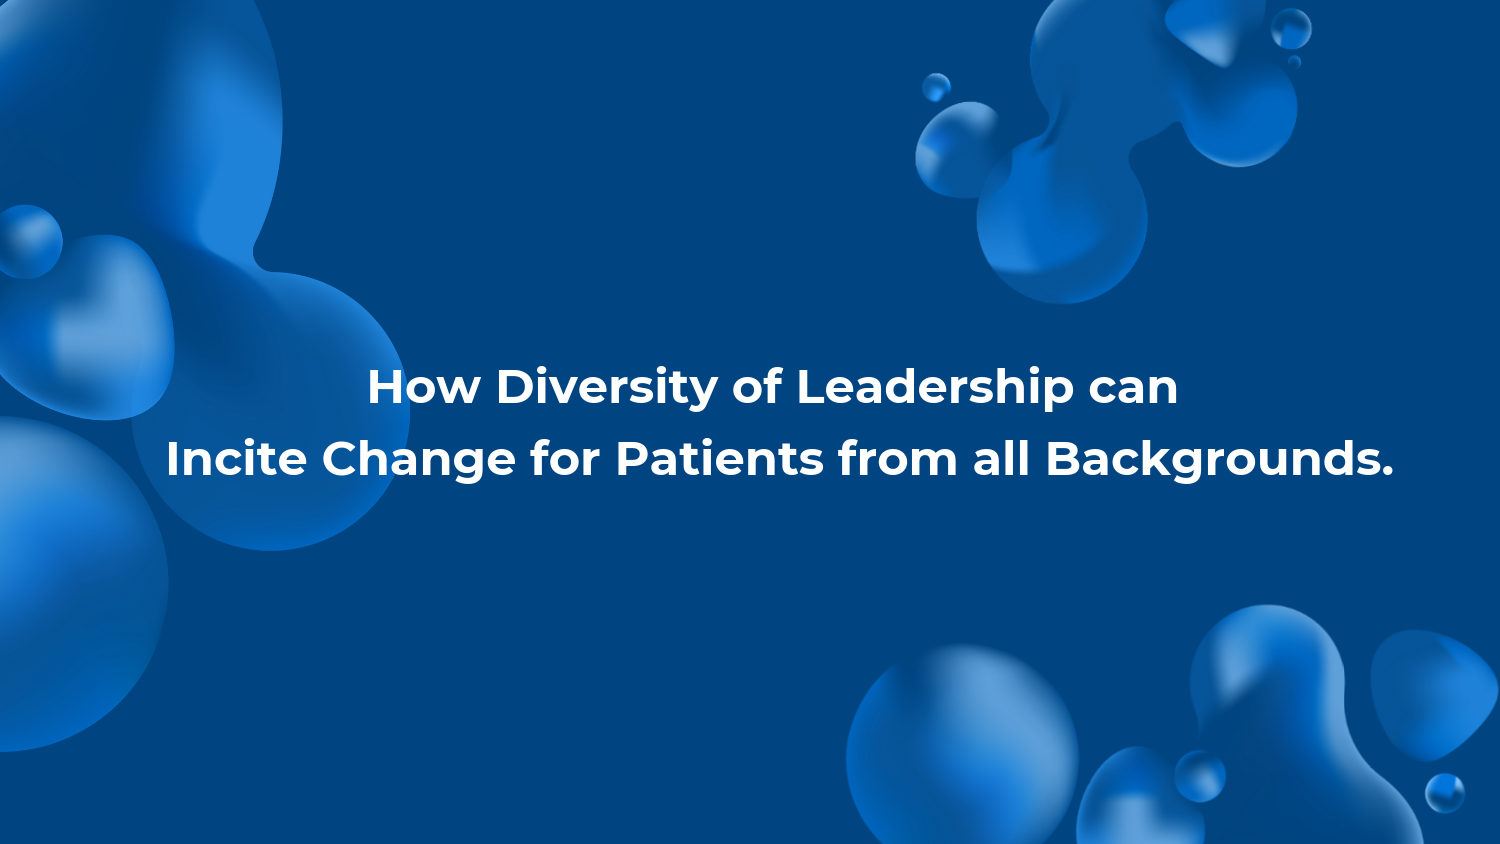 How Diversity of Leadership can Incite Change for Patients from all Backgrounds